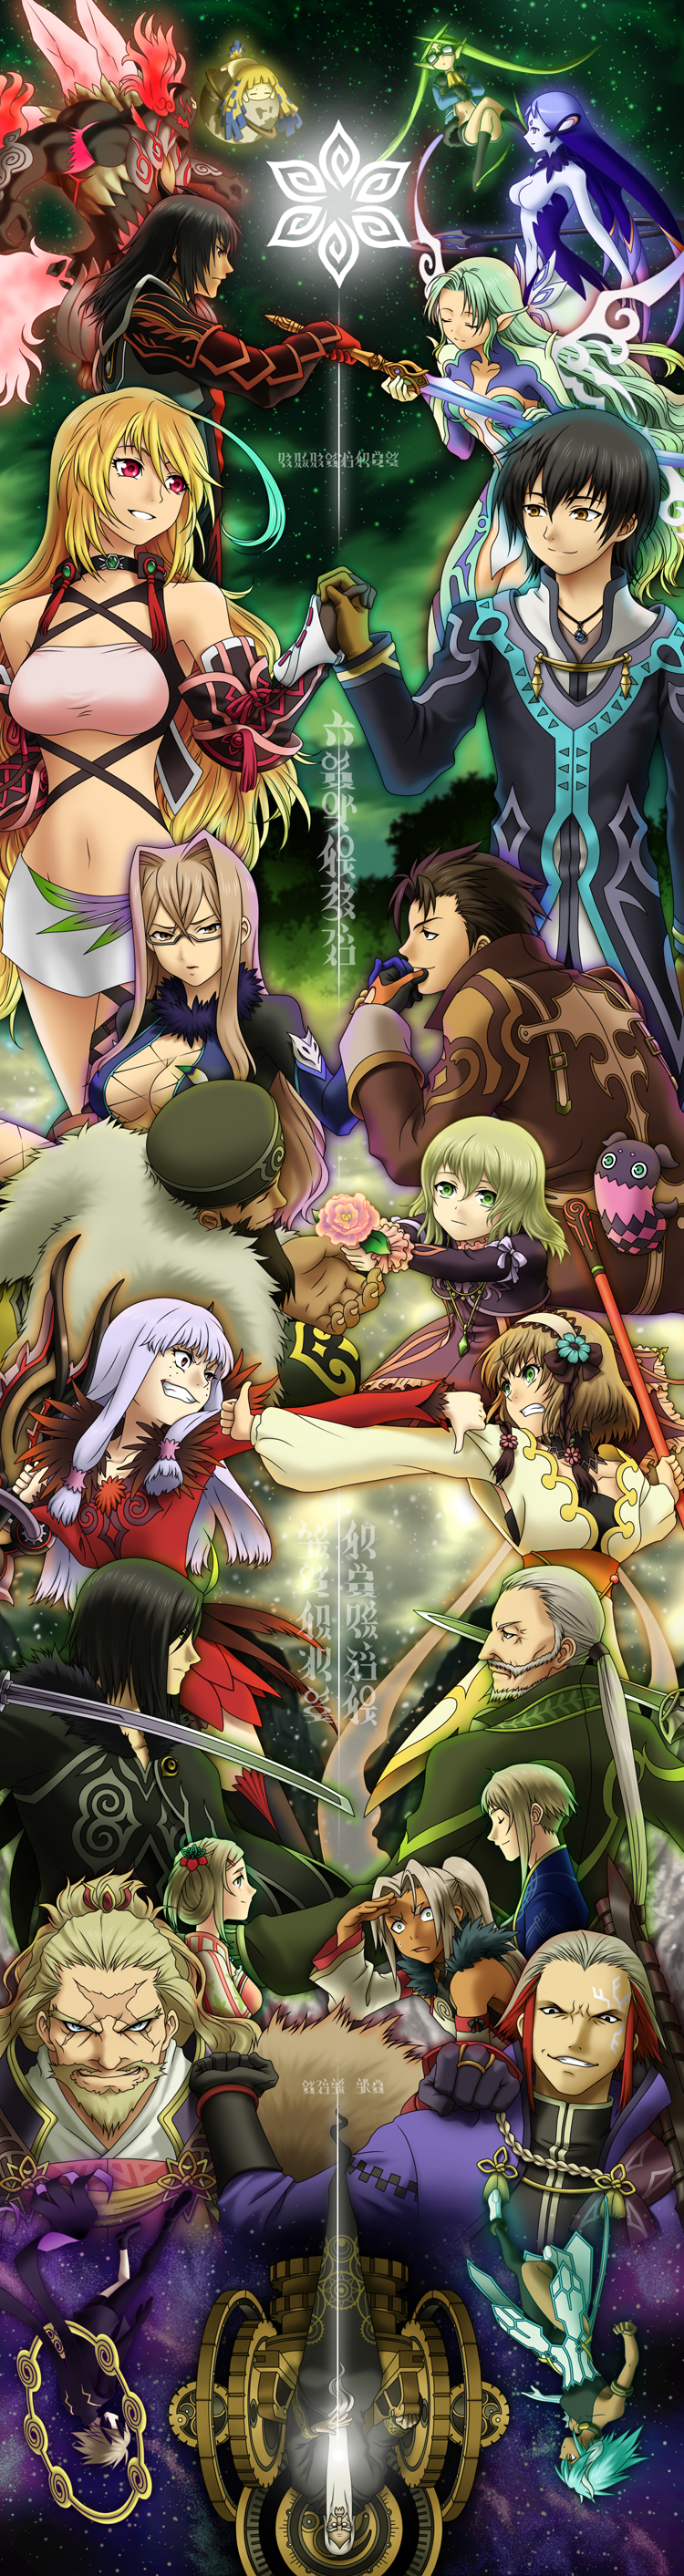 6+girls absurdres agria alvin_(tales_of_xillia) celsius droselle_schall elise_lutus everyone gaias gnome_(tales) highres ibal ifrit_(tales) jao jirand jude_mathis klein_schall leia_roland milla_maxwell multiple_boys multiple_girls muse_(tales_of_xillia) nahatigal preza rowen_j._ilbert sylph_(tales) tales_of_(series) tales_of_xillia tempyou_kango tipo_(xillia) undine_(tales) upside-down volt wingar xillia_symbol